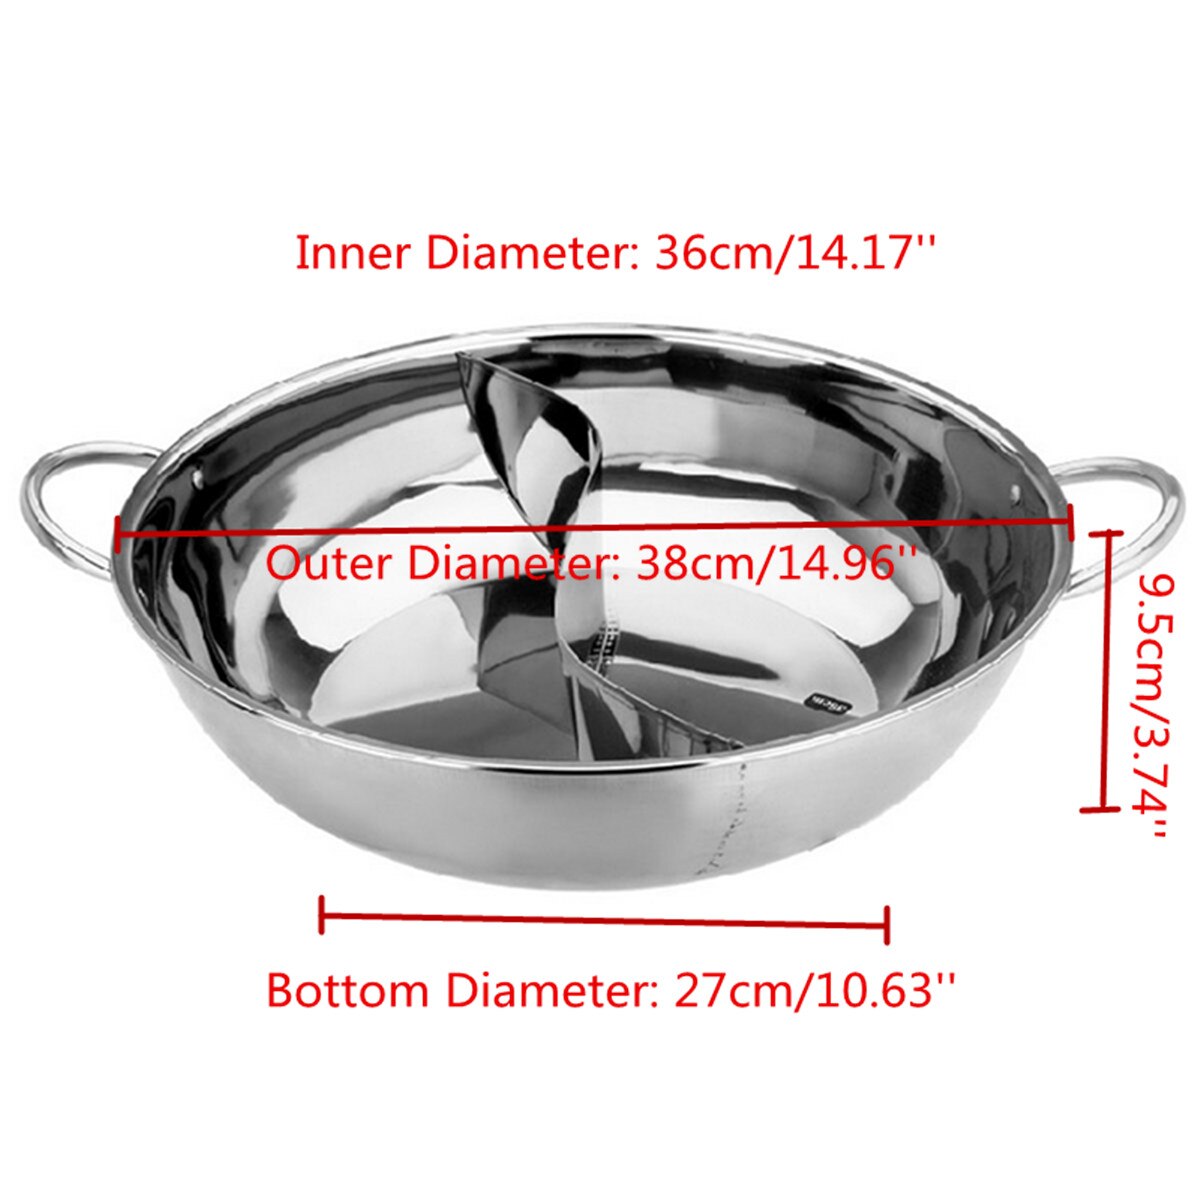 Stainless Steel Pot Hotpot Induction Cooker Gas Stove Compatible Pot Home Kitchen Cookware Soup Cooking Pot Twin Divided